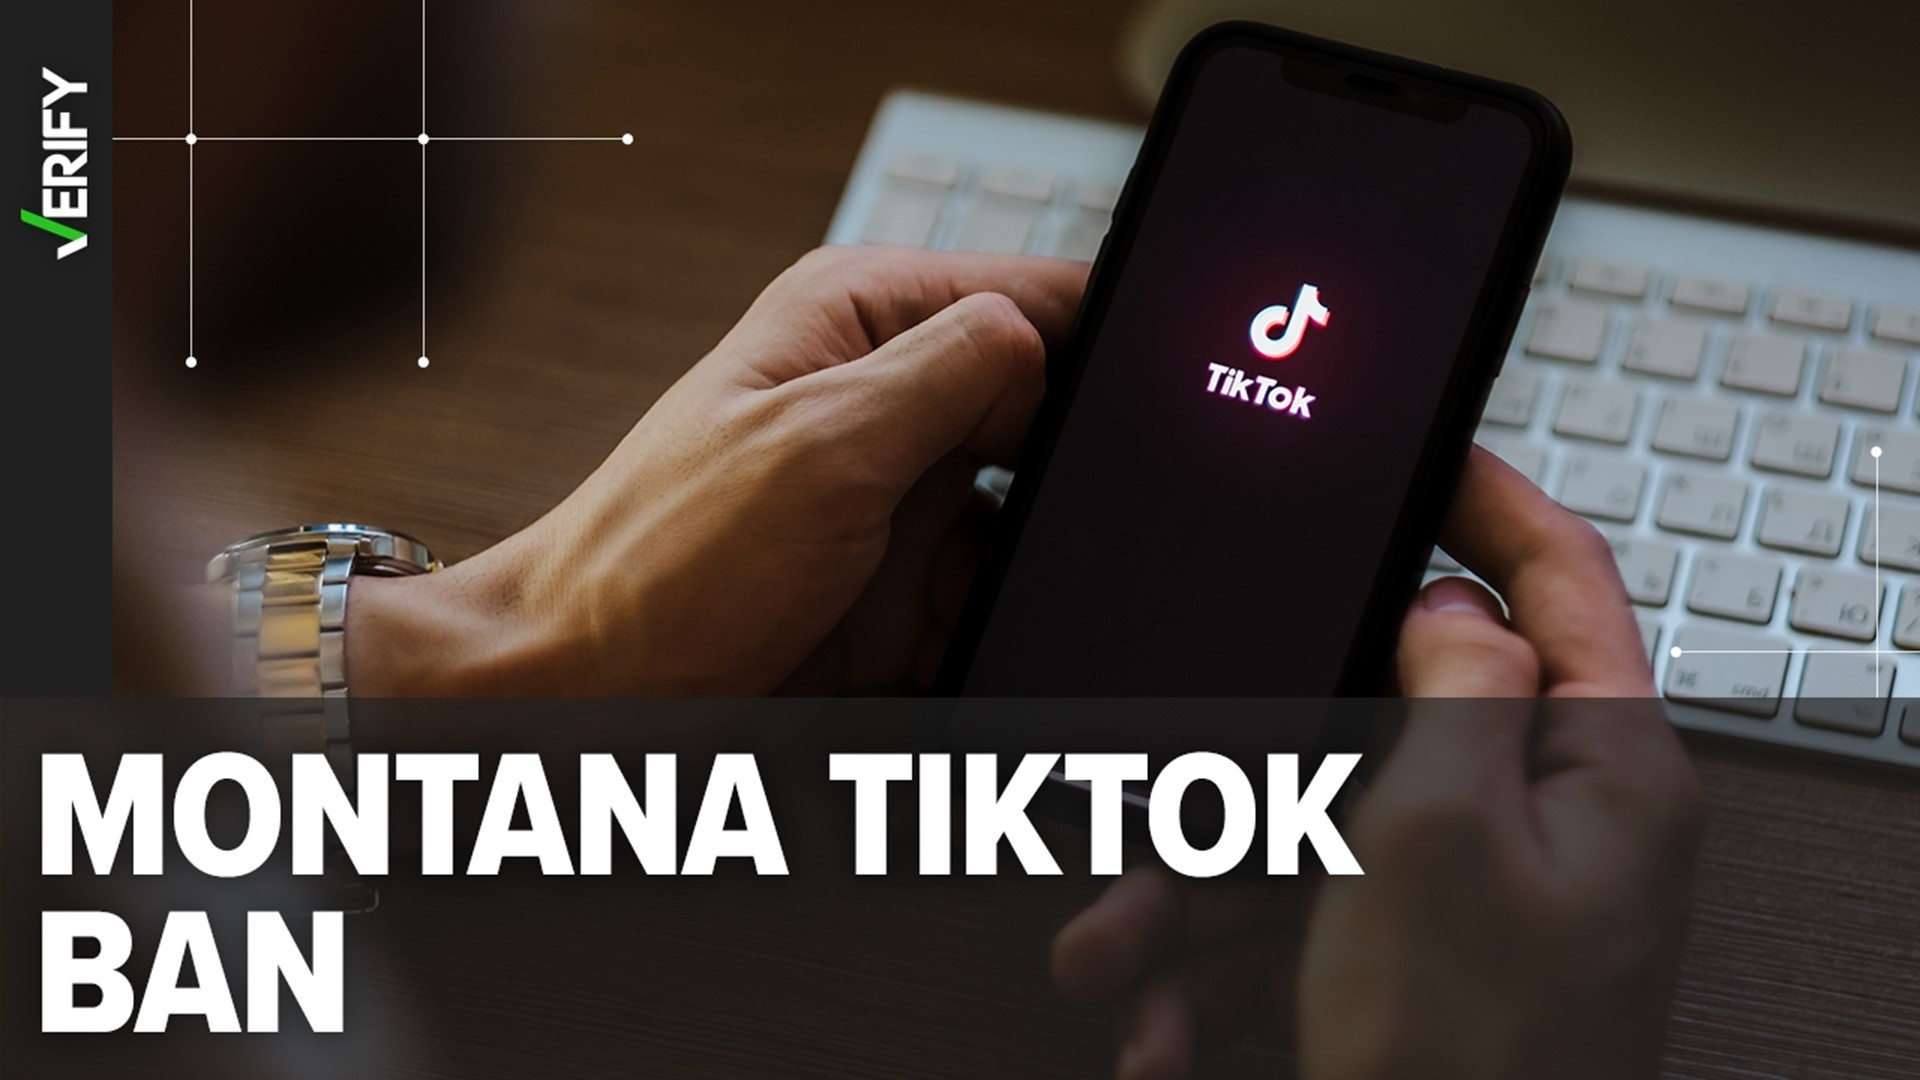 The law makes it illegal for TikTok to operate and prohibits downloads of the app in Montana. Apple, Google and TikTok could face penalties, not app users.